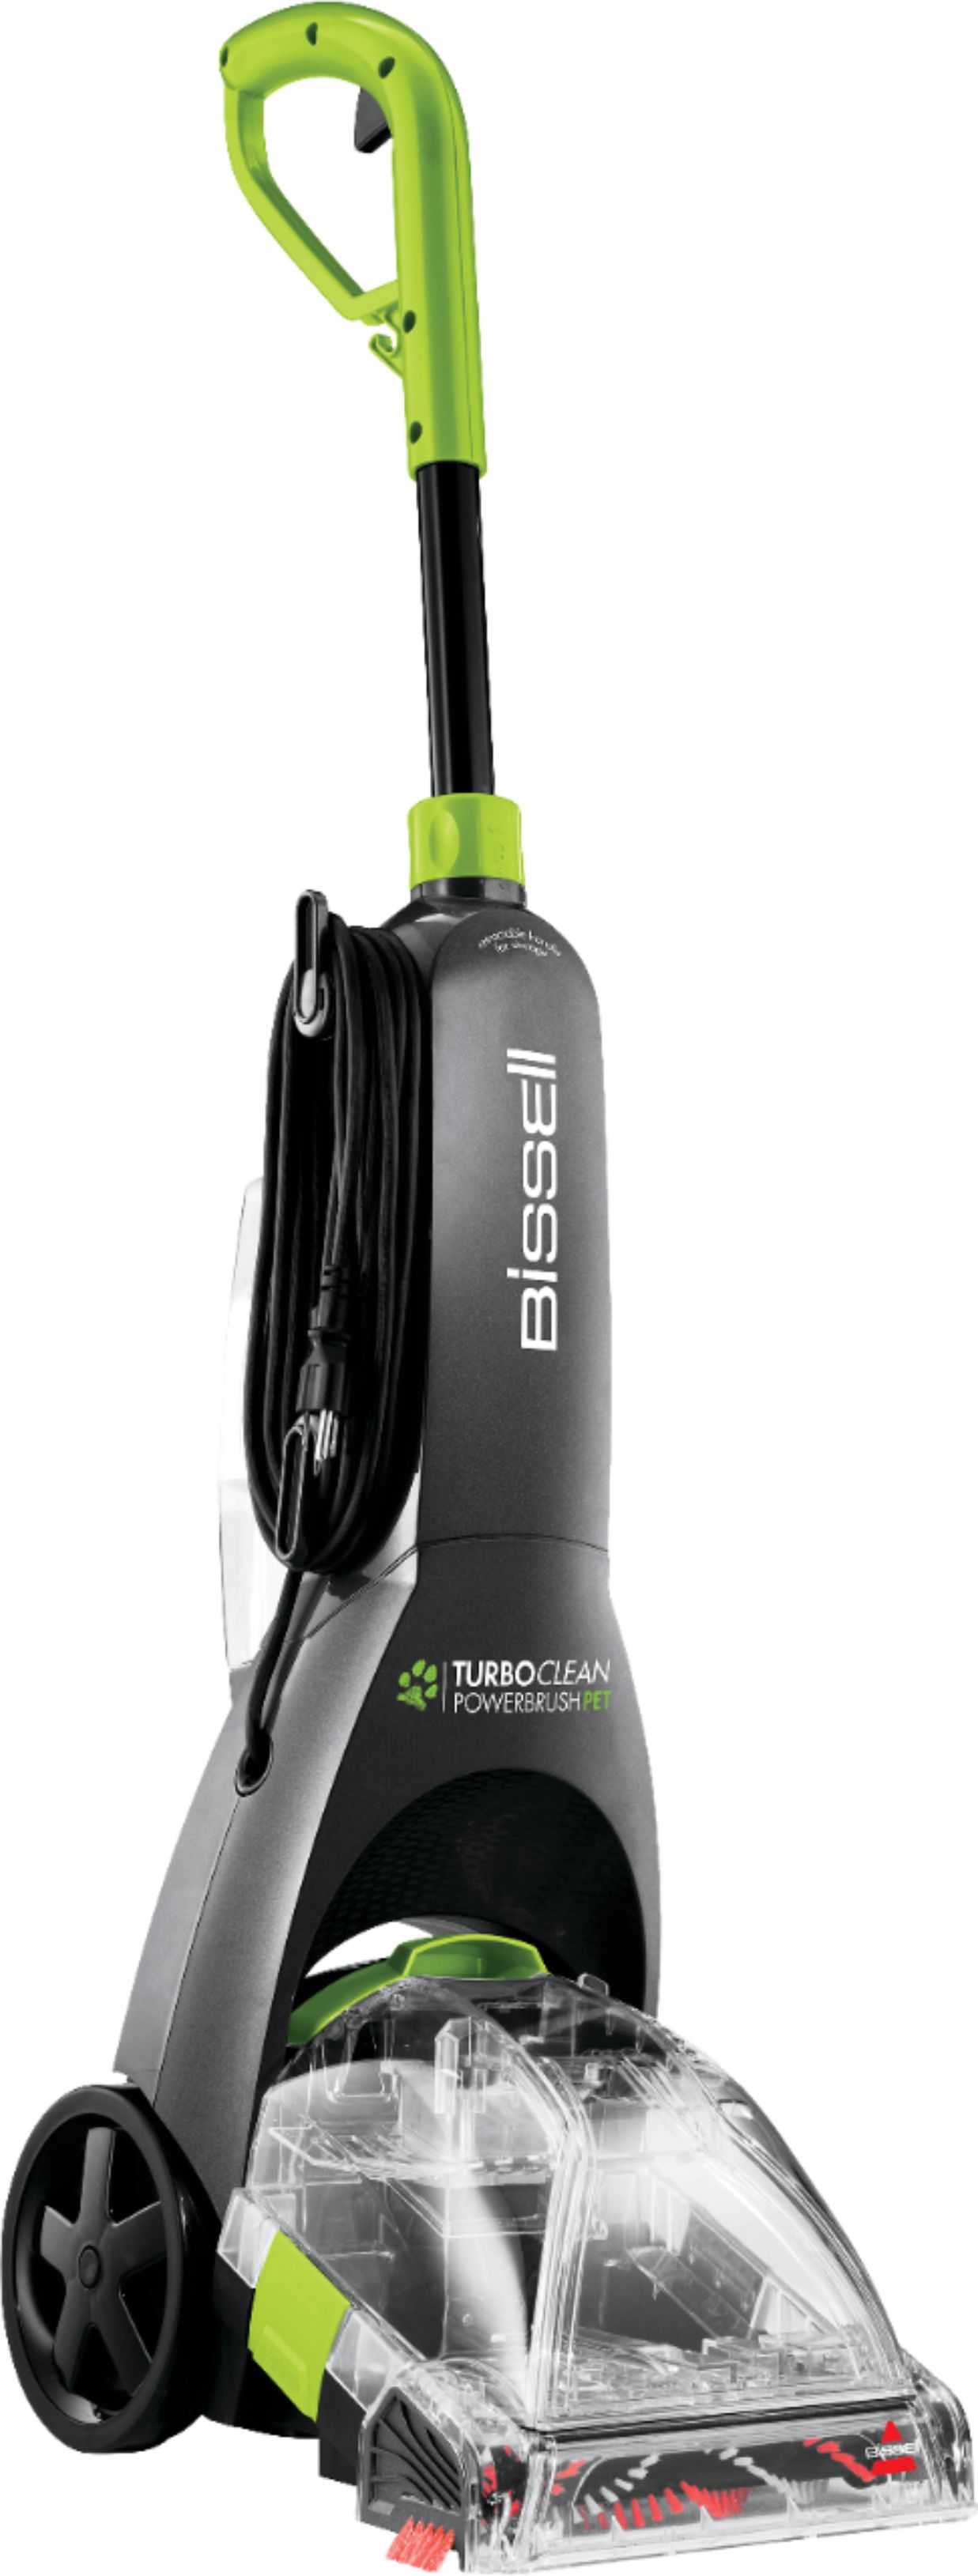 TurboClean PowerBrush Pet Carpet Cleaner – National Product Review